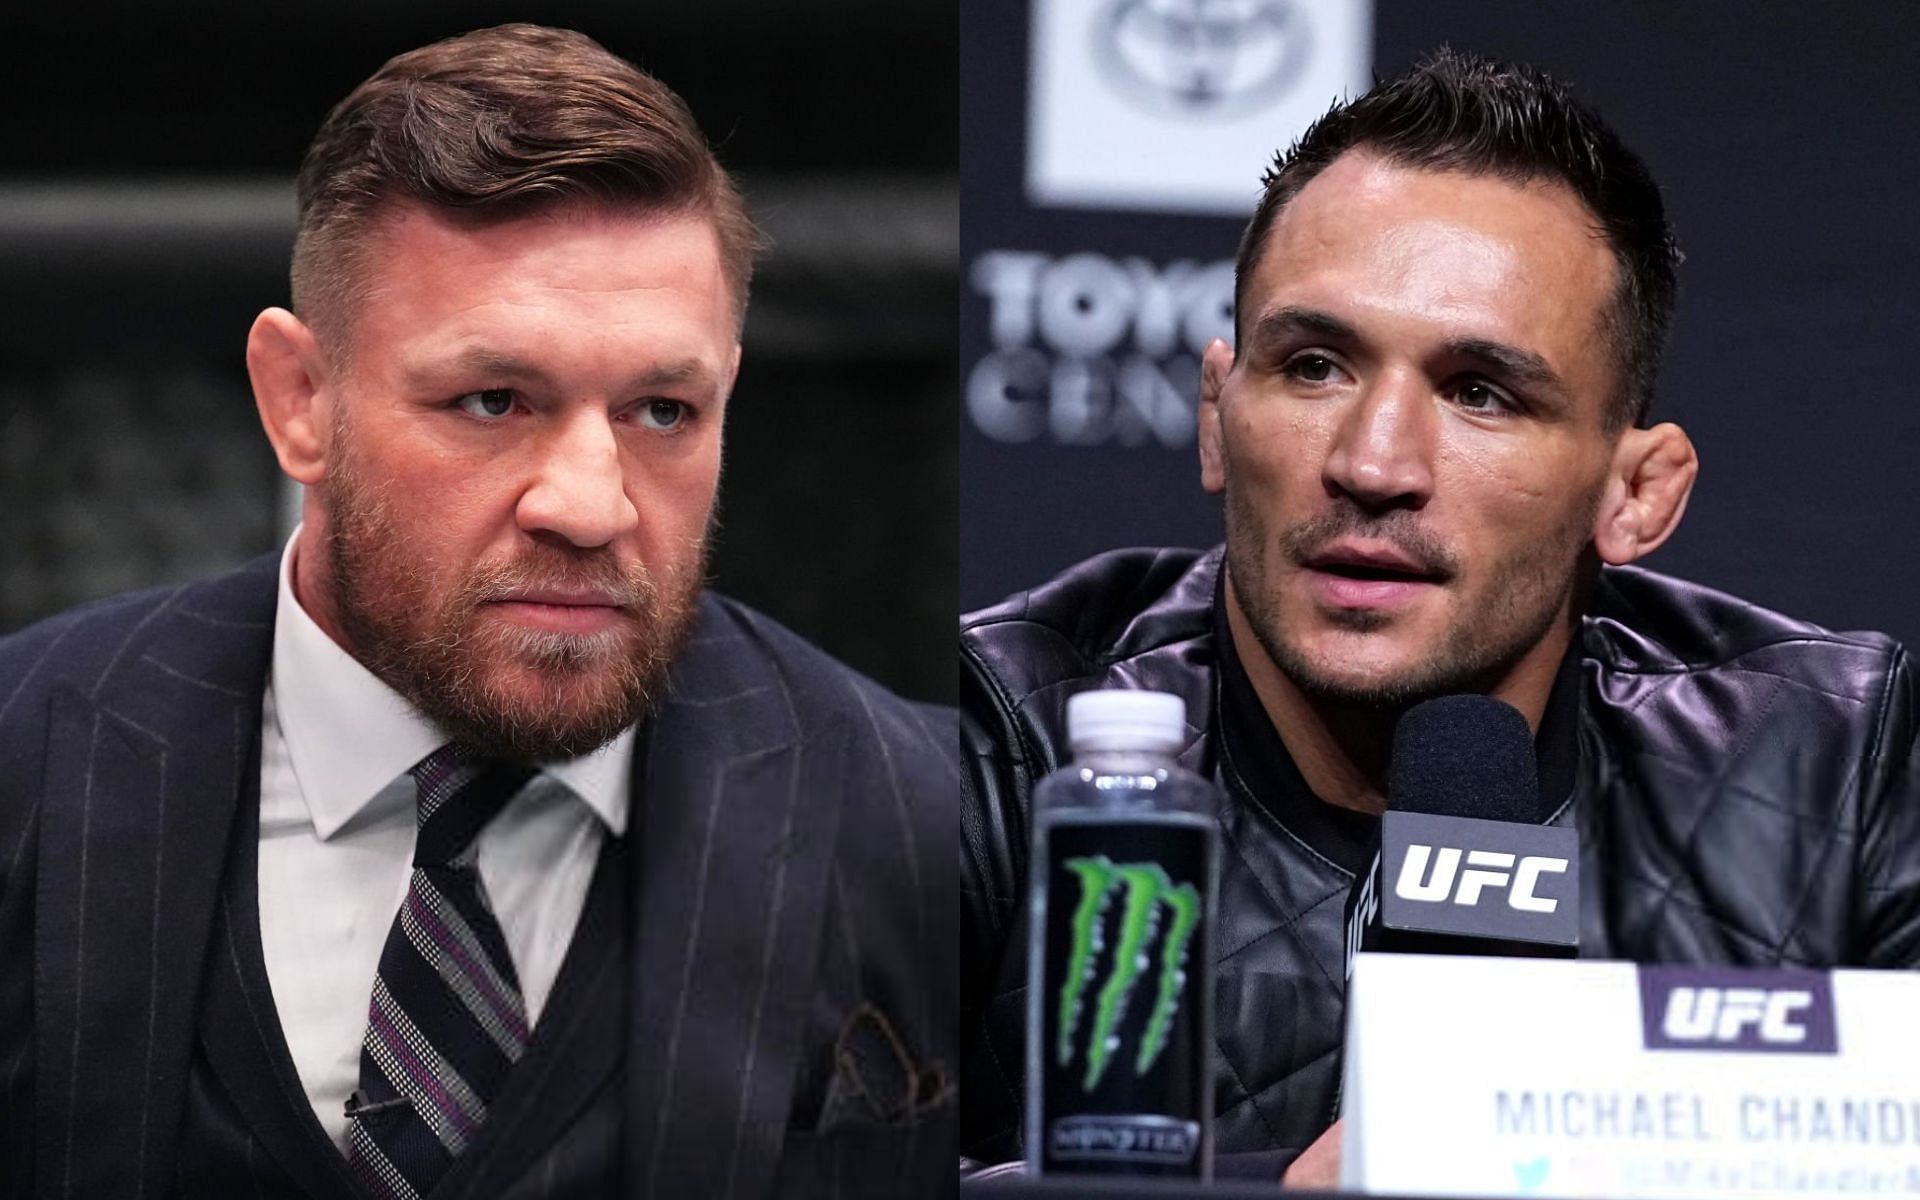 Conor McGregor (left) and his PR team are trying to &quot;wait&quot; Michael Chandler (right) out, claims 